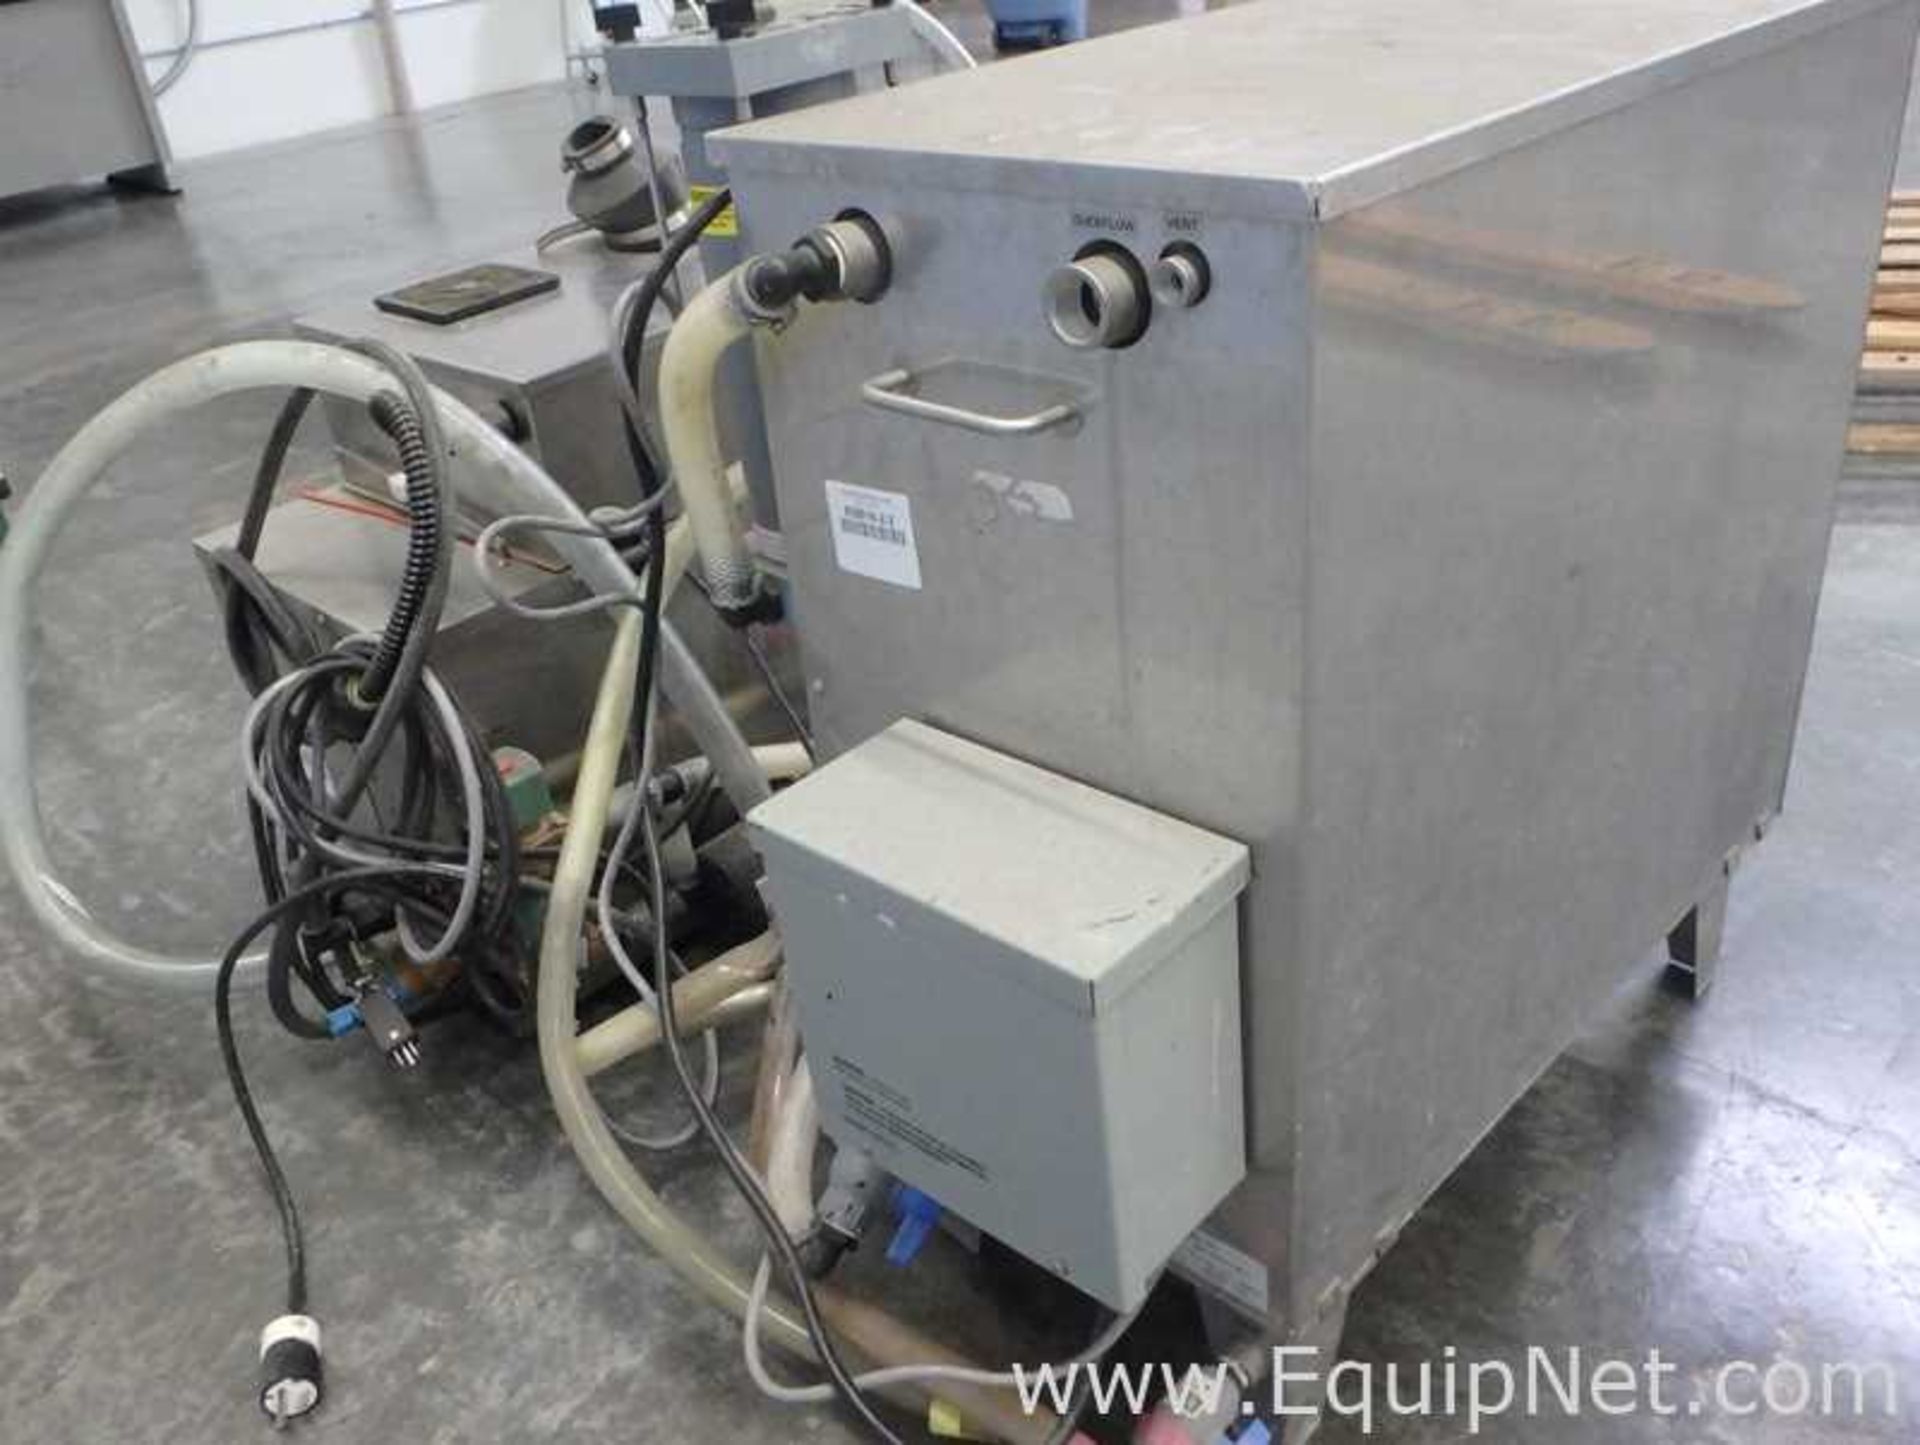 ESMA Inc. E700 Ultrasonic Cleaning System with E997 30Gal Heated Storage Tank - Image 26 of 26